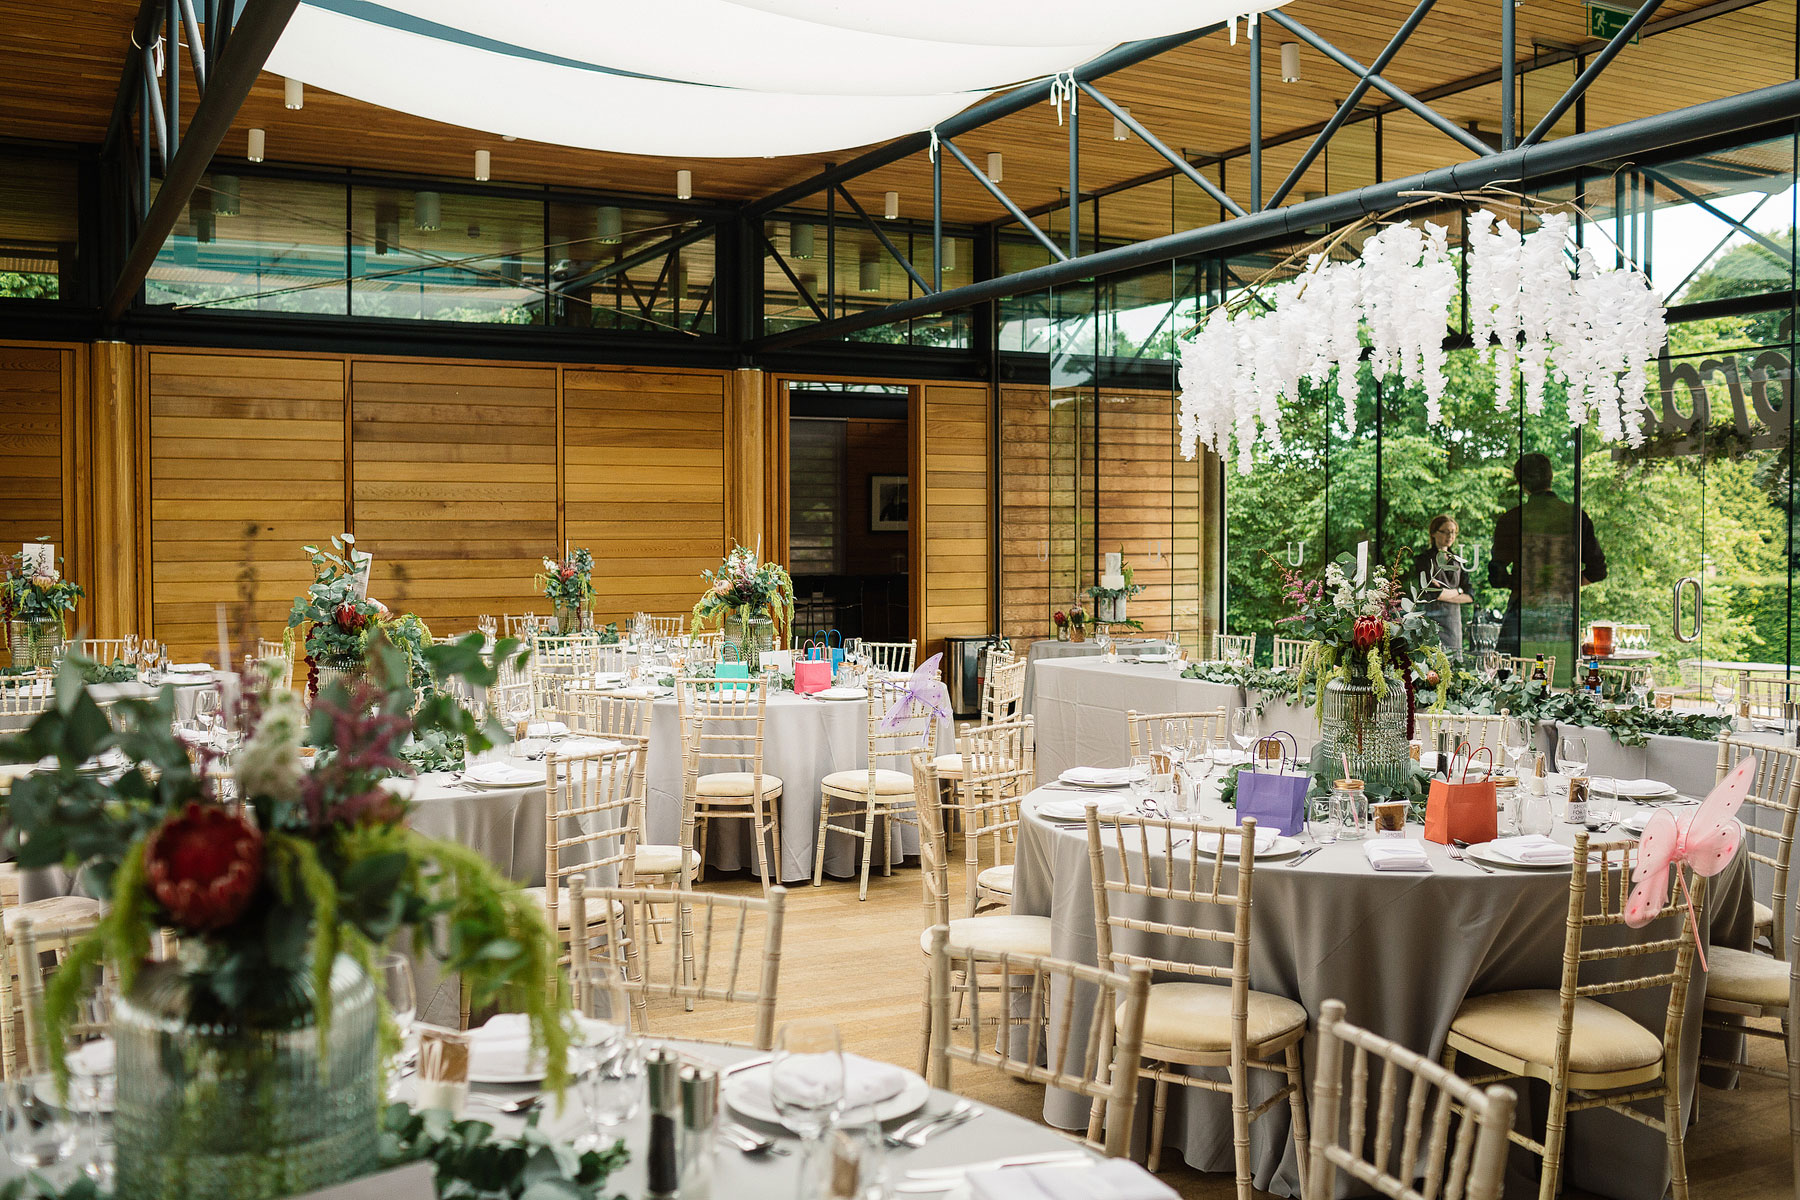 utopia at brooughton hall dressed for an informal wedding photos